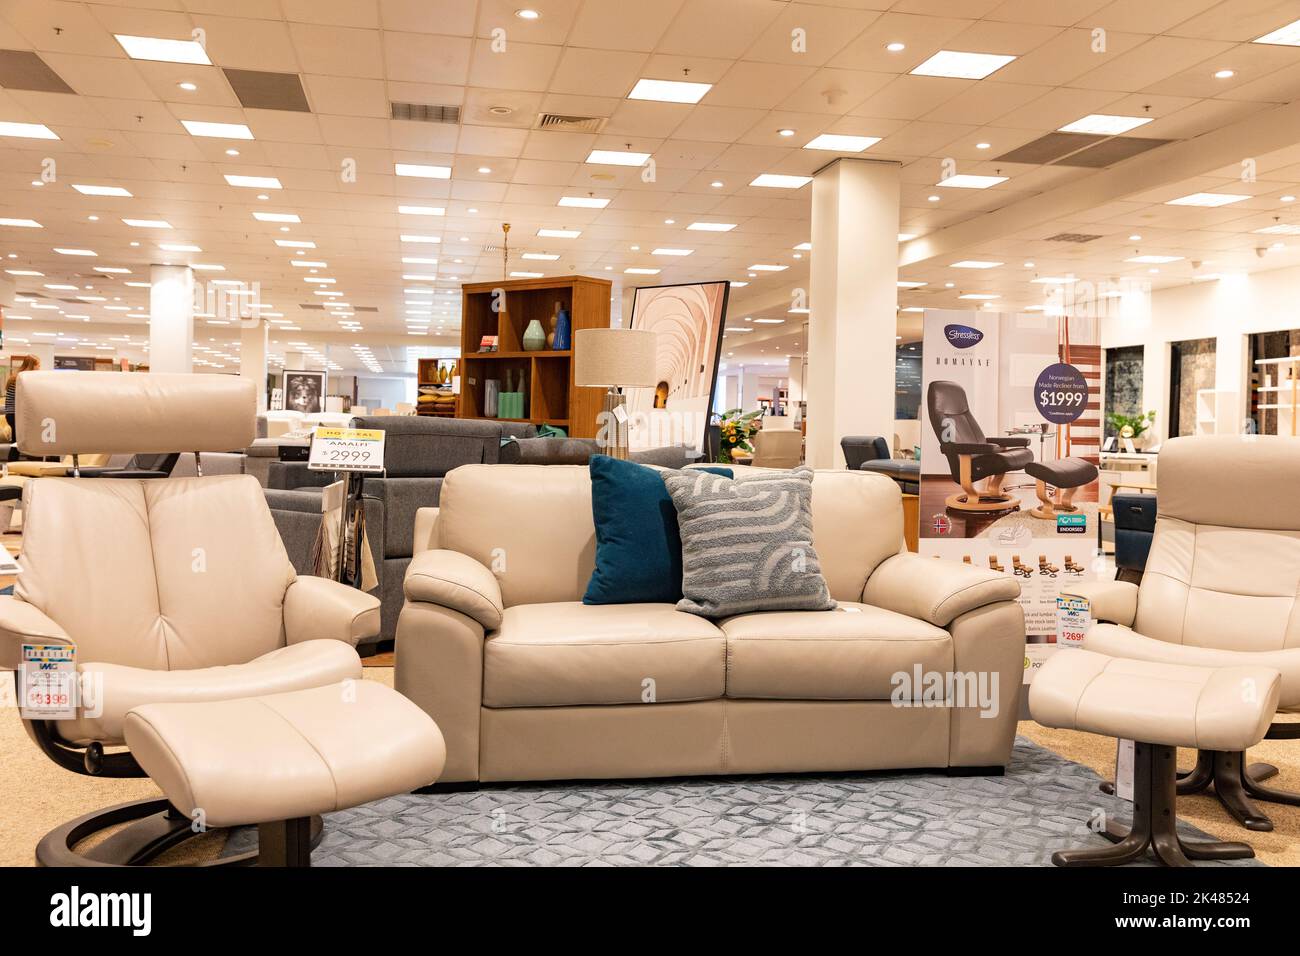 Harvey Norman Domayne furniture store, stressless leather recliner chair in beige leather with footstool, also two seater settee sofa,Sydney,Australia Stock Photo